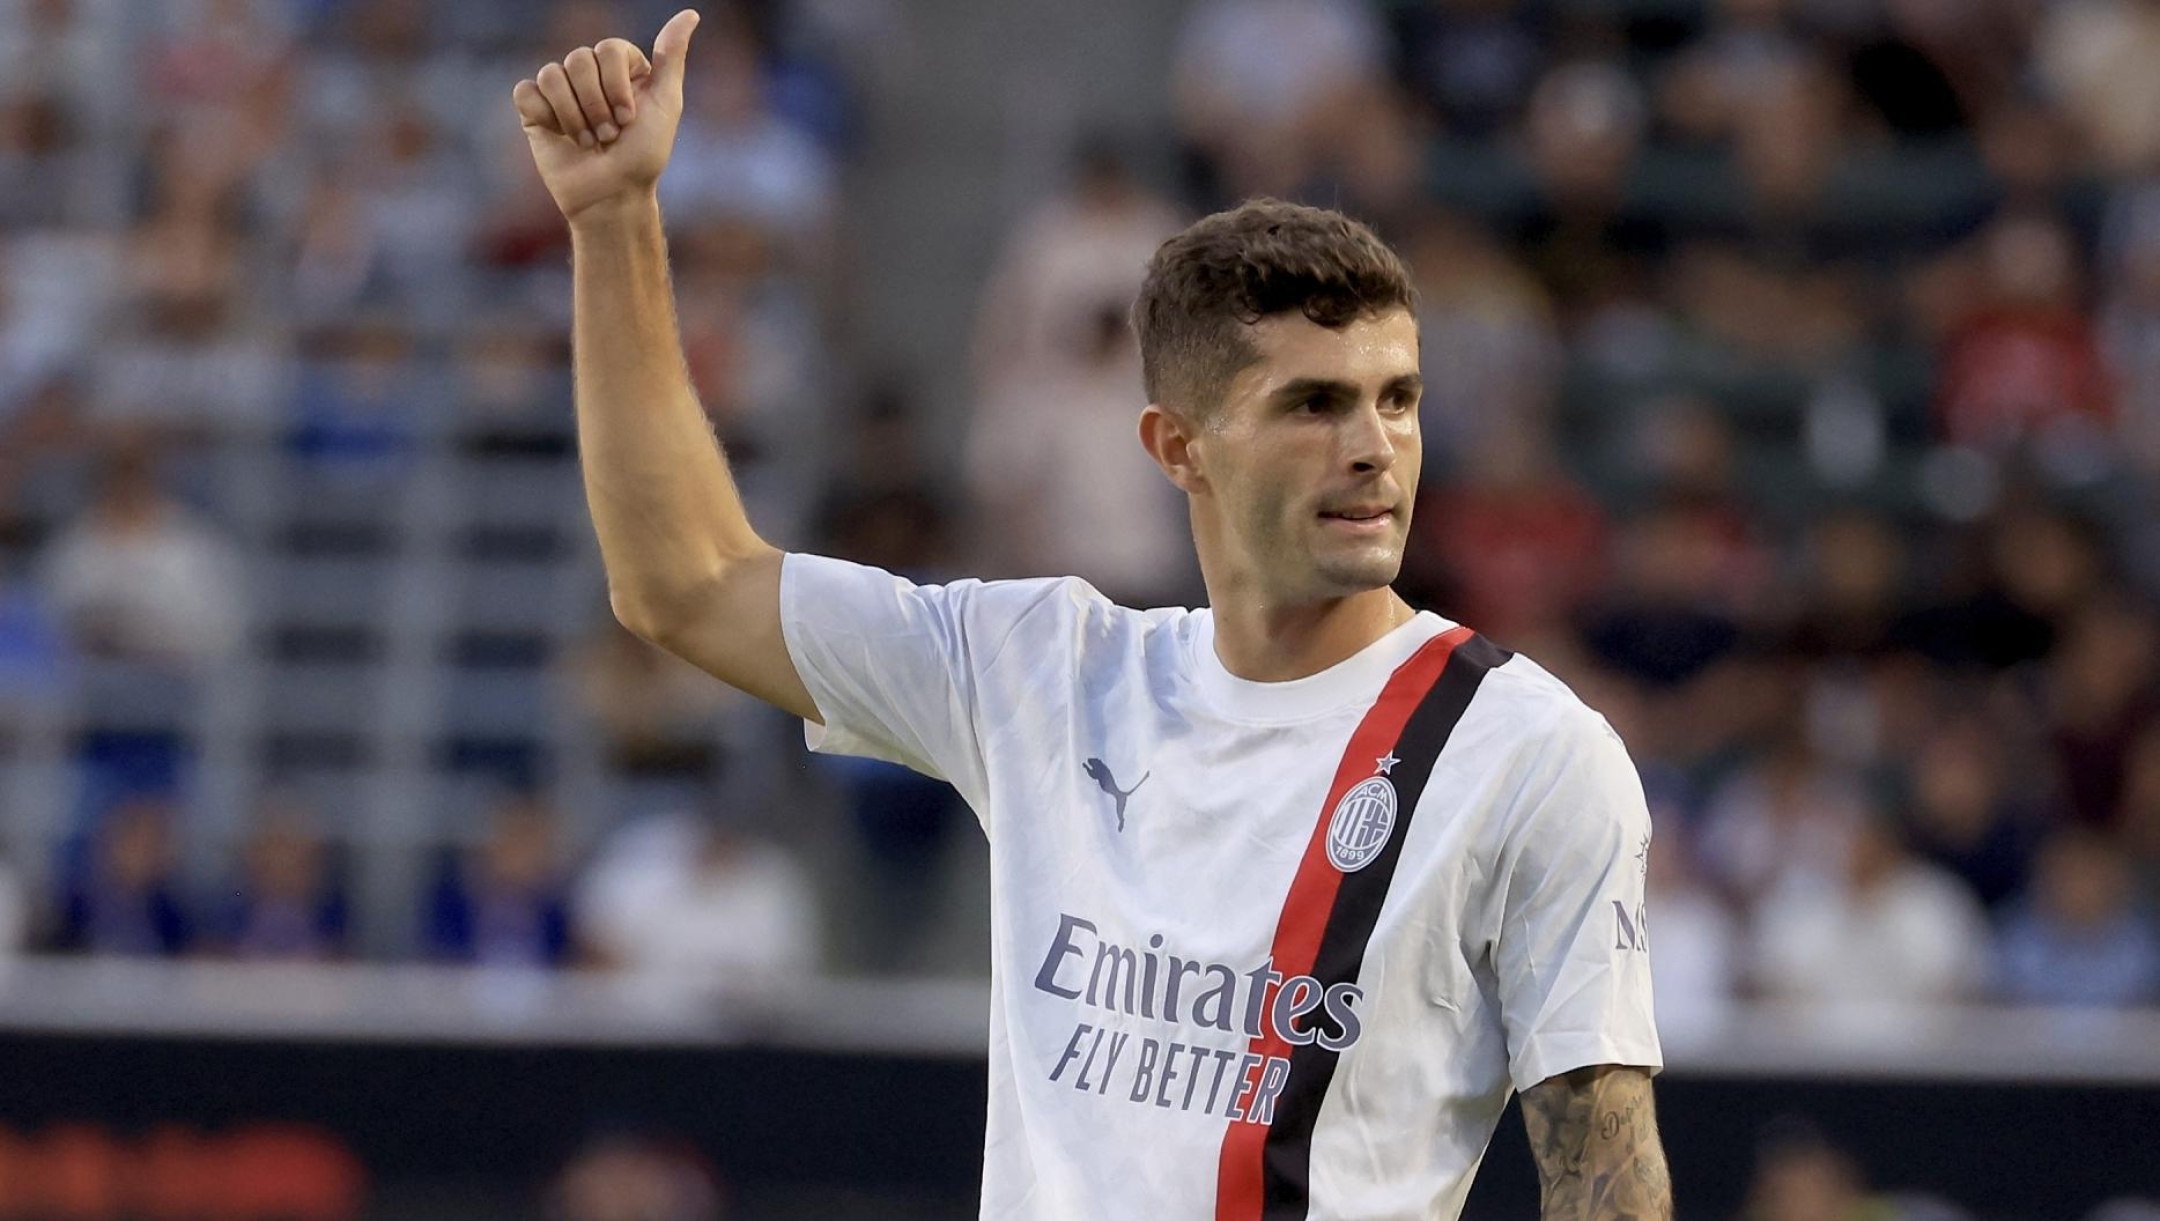 CARSON, CALIFORNIA - JULY 27: Christian Pulisic of AC Milan gestures during the Pre-Season Friendly match between Juventus and AC Milan at Dignity Health Sports Park on July 27, 2023 in Carson, California. (Photo by Giuseppe Cottini/AC Milan via Getty Images)